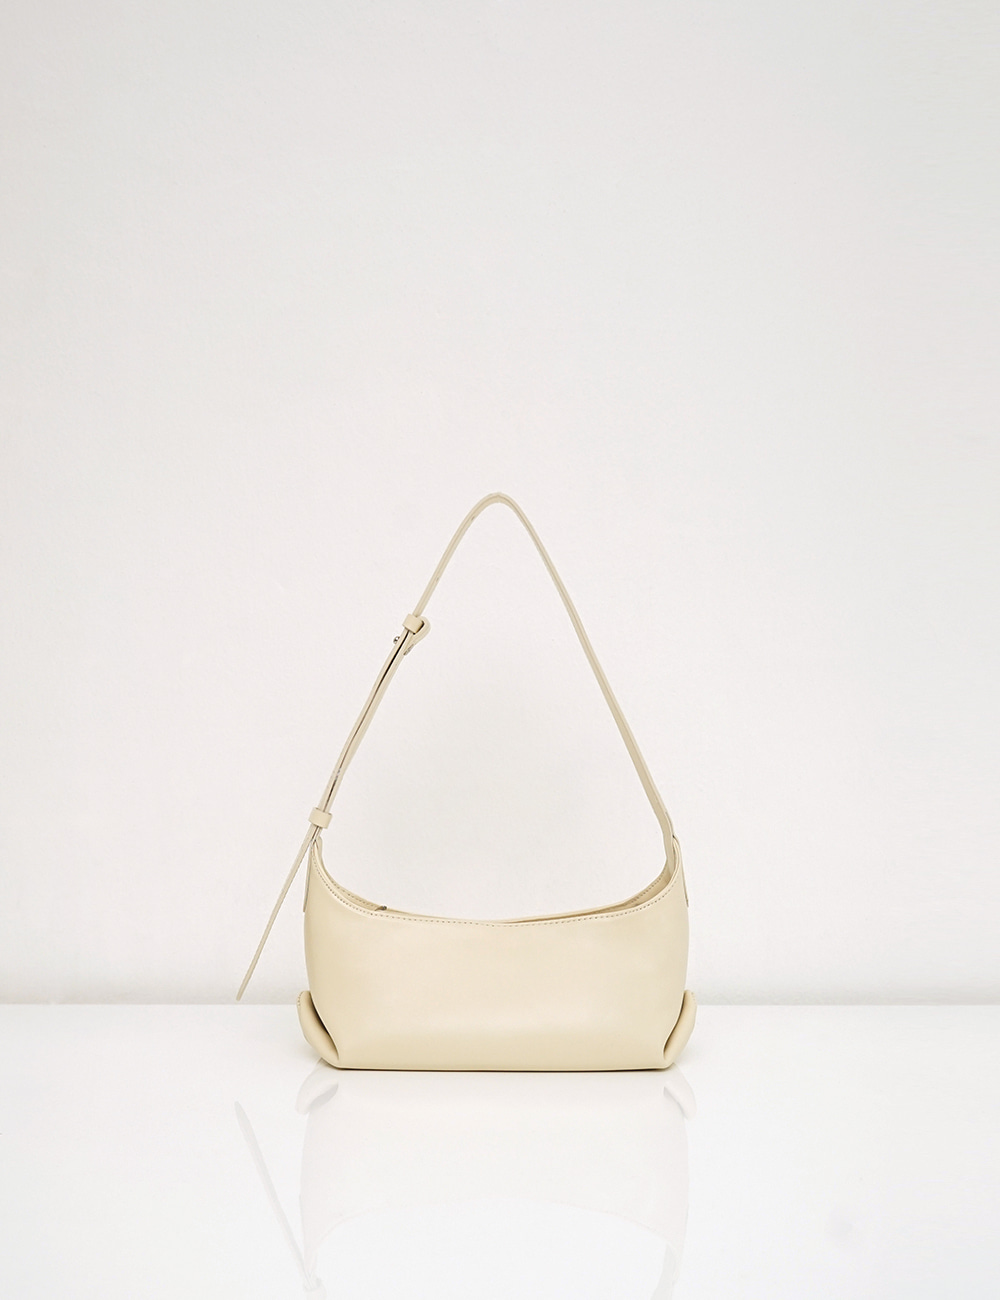 Bote bag / butter